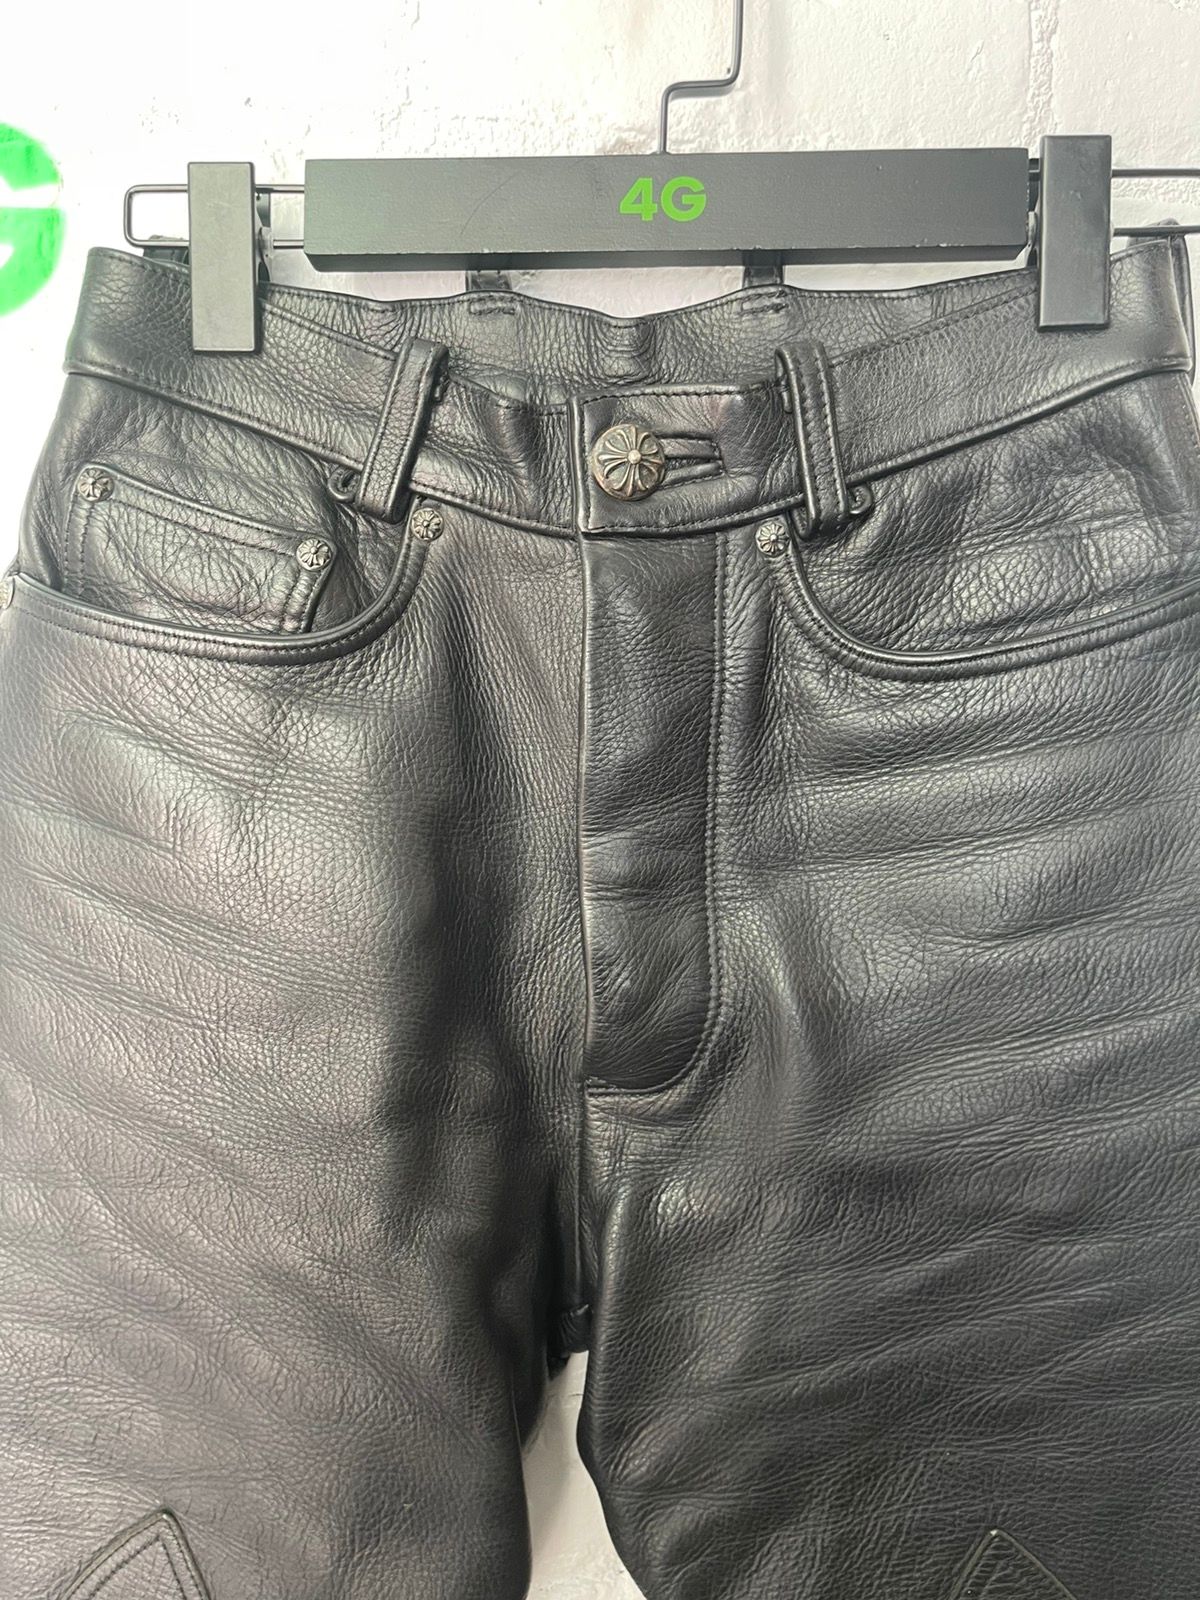 Chrome Hearts LEATHER Jeans Cross Patch sz 25 or 26